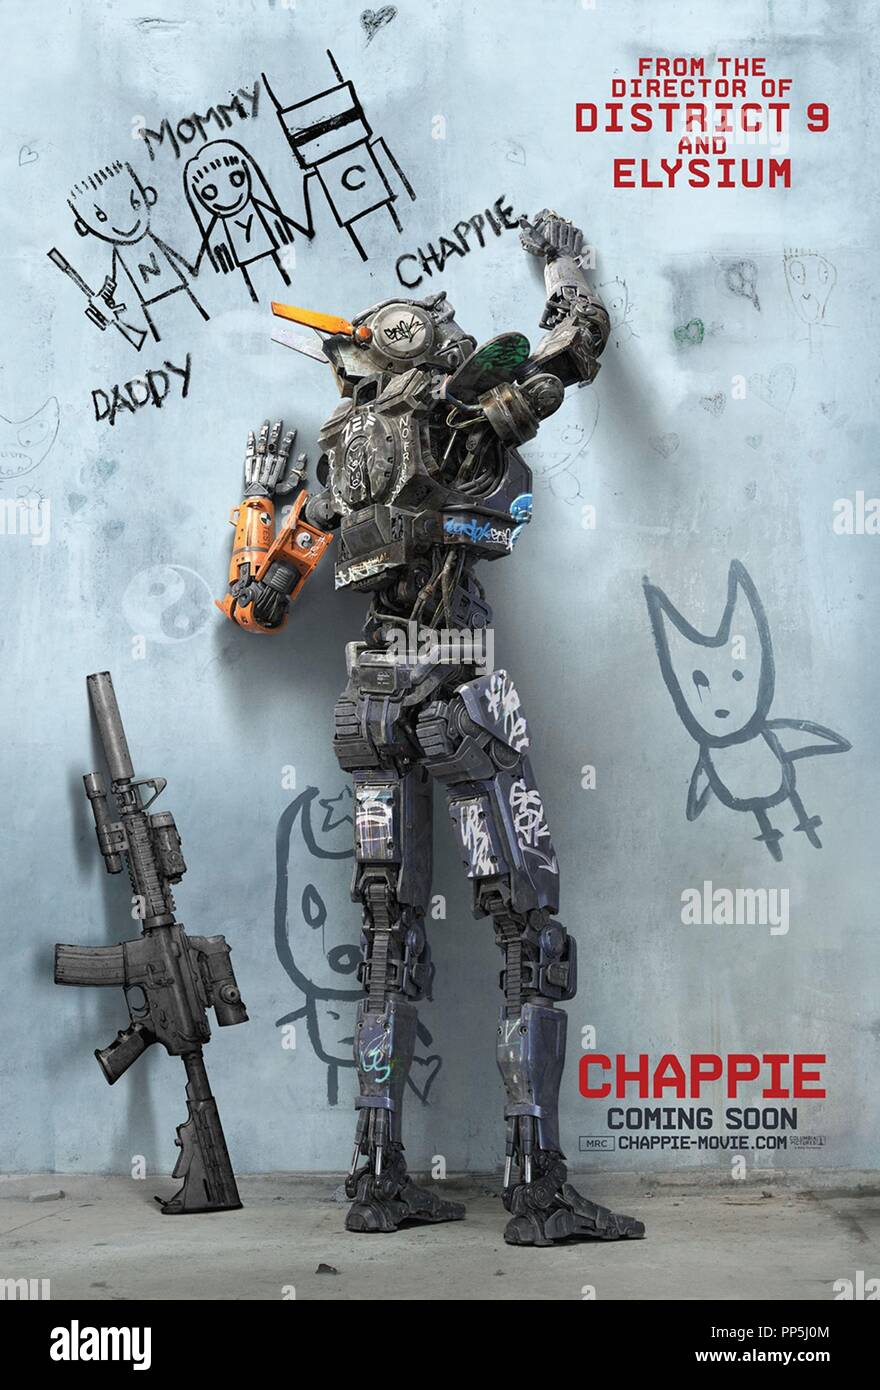 Original film title: CHAPPIE. English title: CHAPPIE. Year: 2015. Director:  NEILL BLOMKAMP. Credit: ALPHA CORE/COLUMBIA PICTURES/LSTAR CAPITAL/MEDIA  RIGHTS CAPI / Album Stock Photo - Alamy